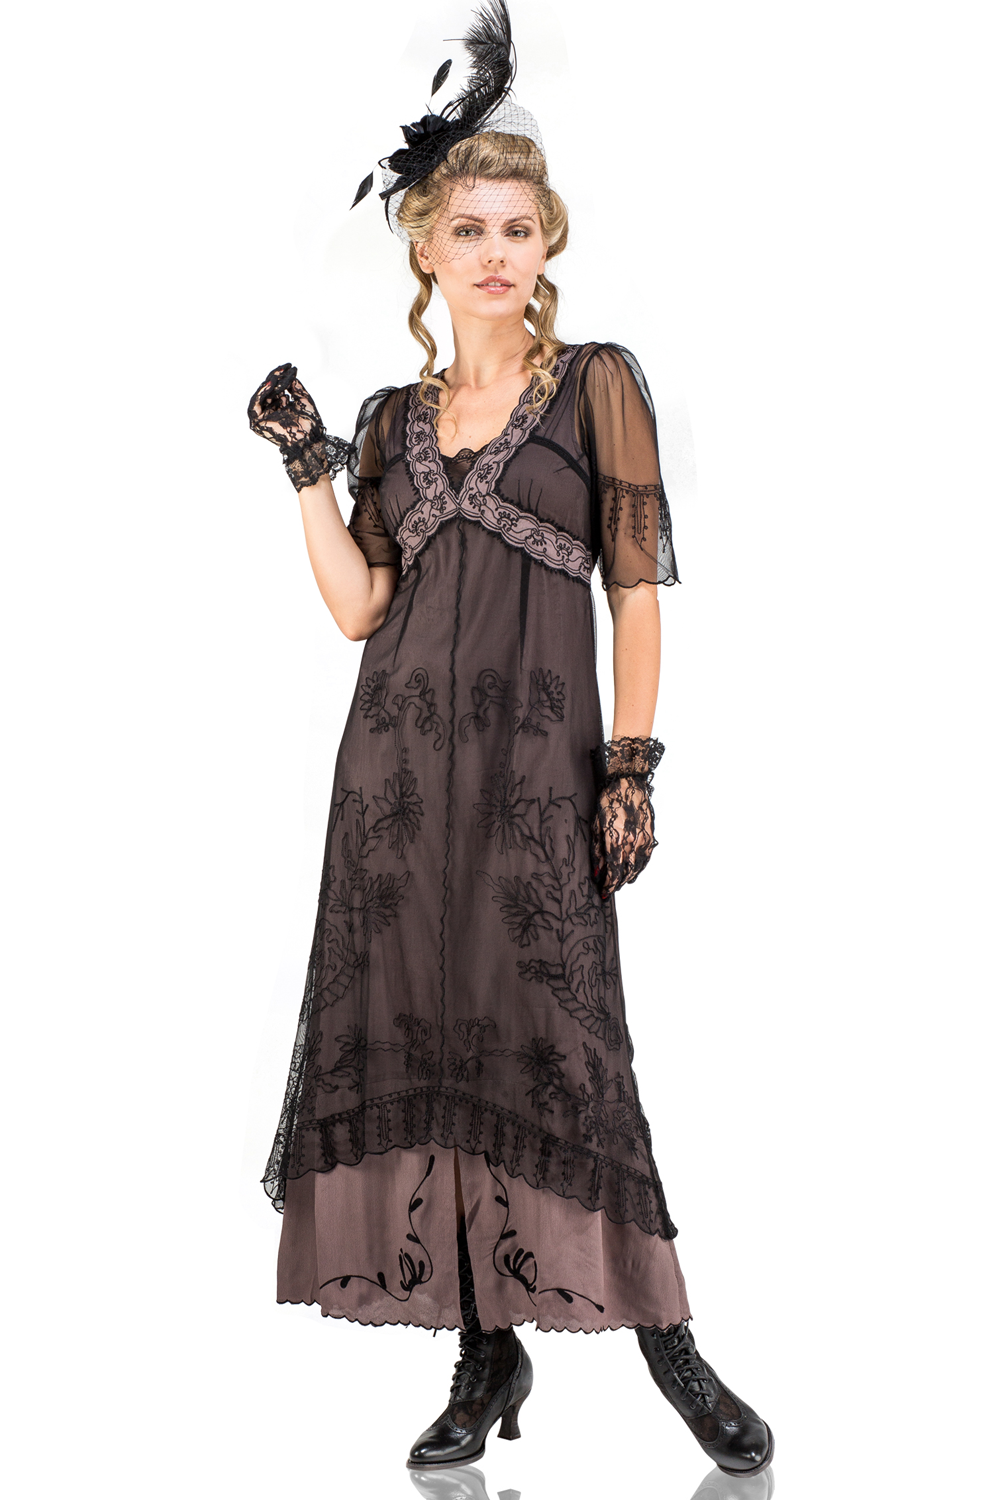 1920s Style Dresses, 1920s Dress Fashions You Will Love New Vintage Titanic Tea Party Dress in Black-Coco by Nataya $249.00 AT vintagedancer.com